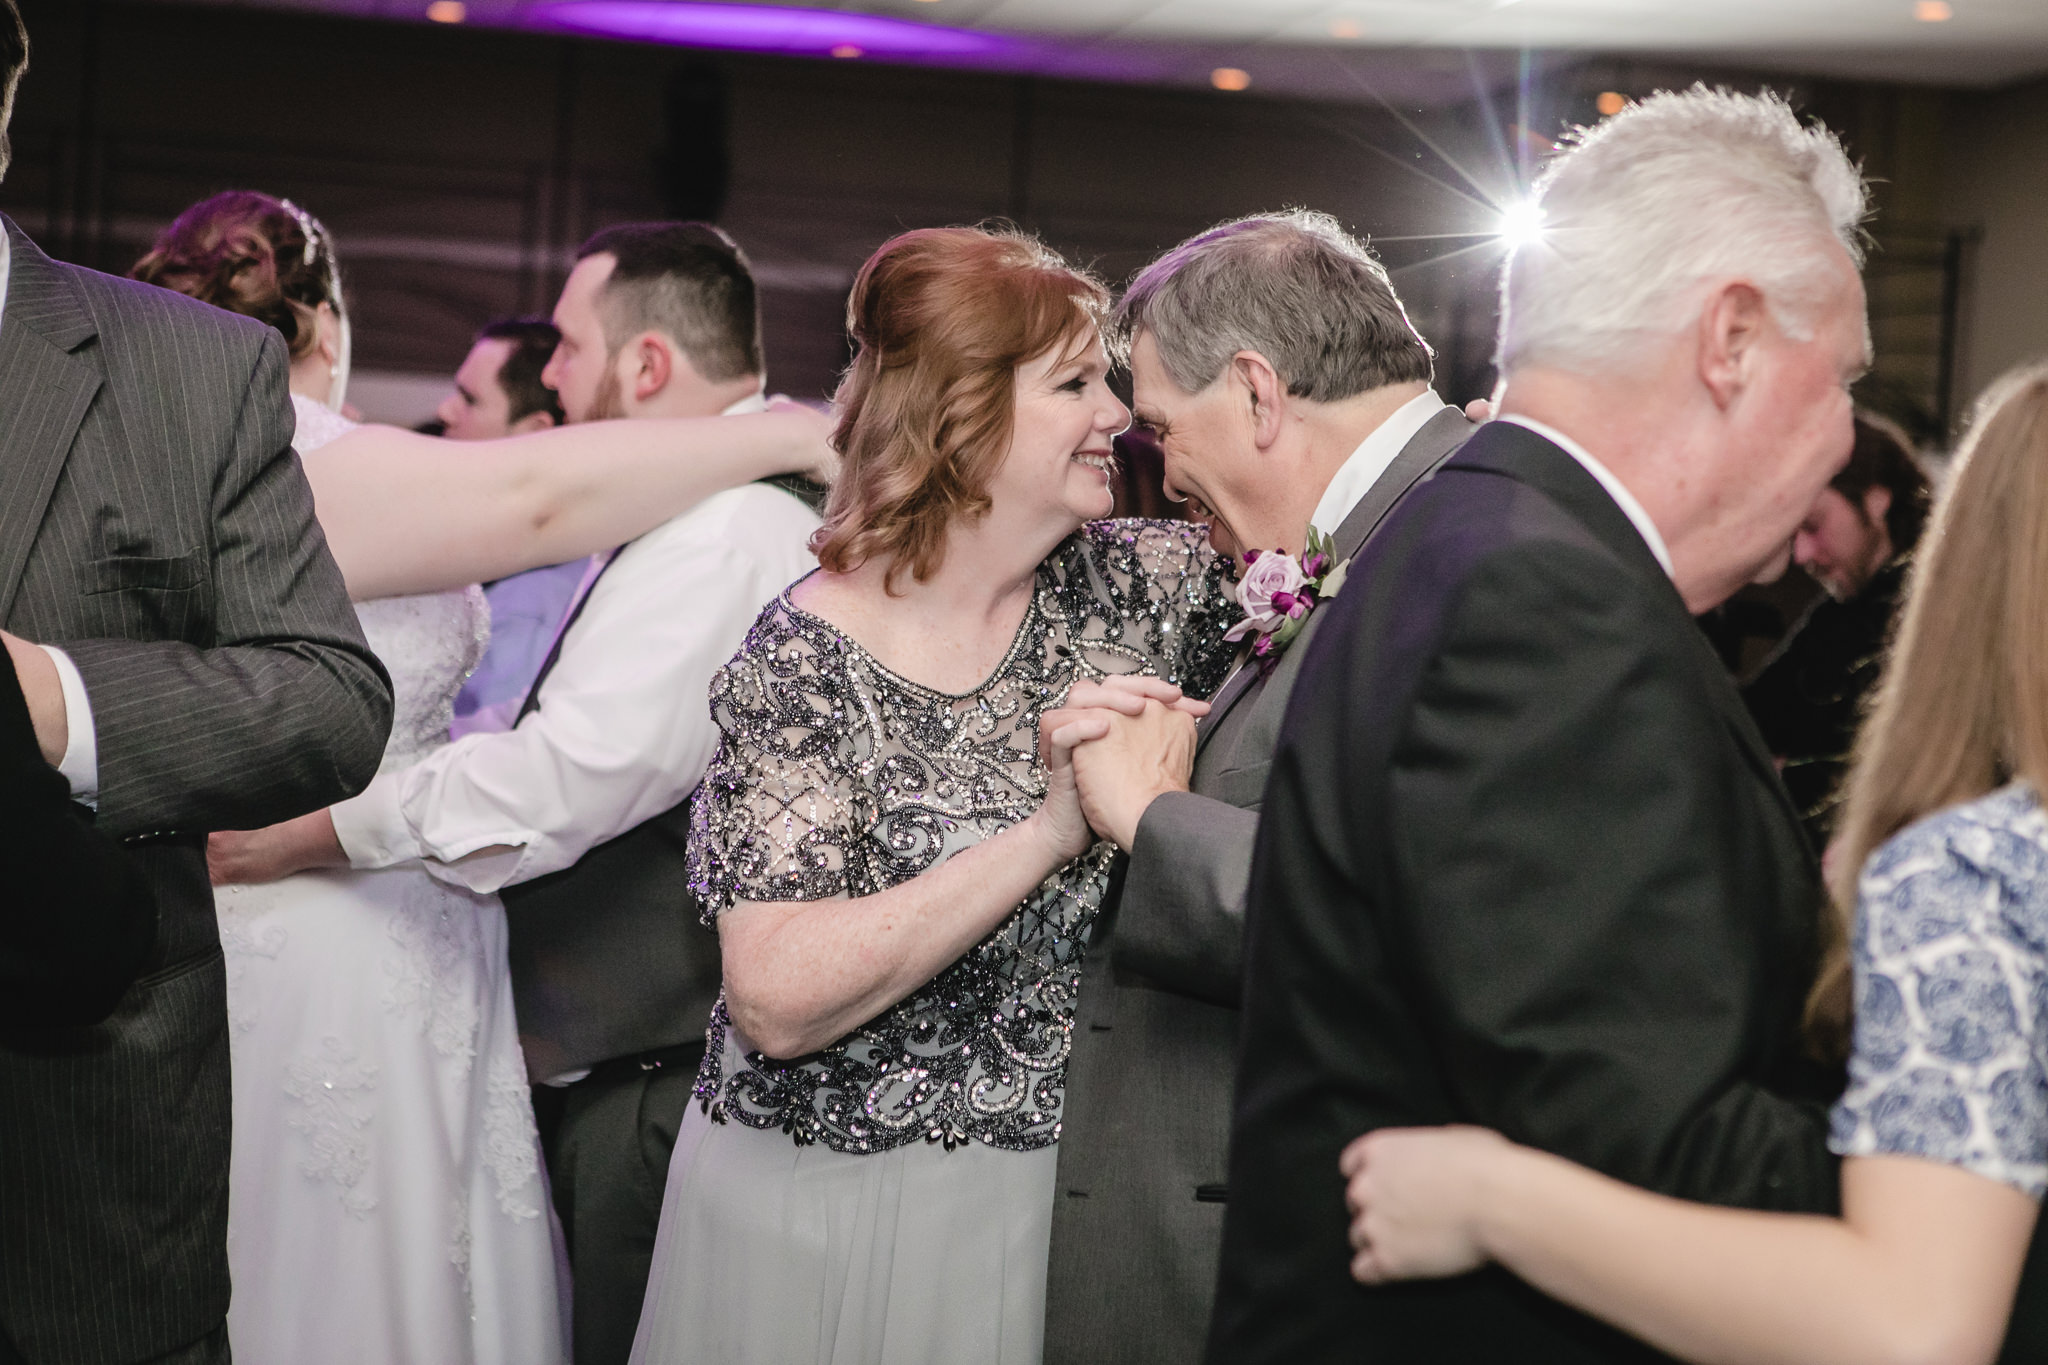 Parents of the bride laugh together while dancing at the Fez